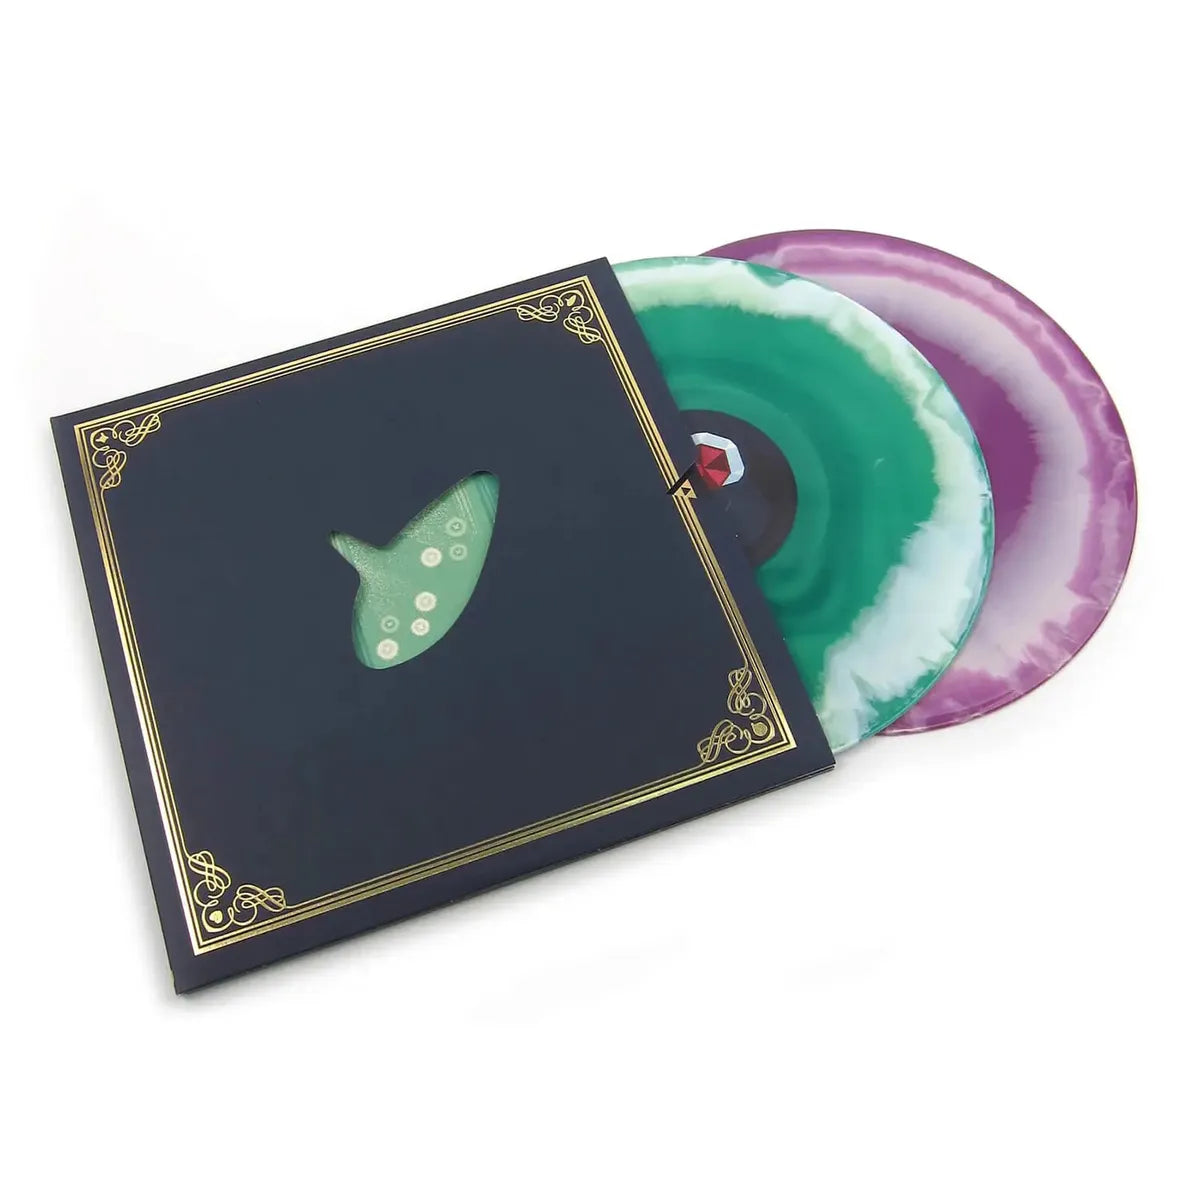 Hero Of Time The Legend Of Zelda Ocarina Of Time 2lps color import